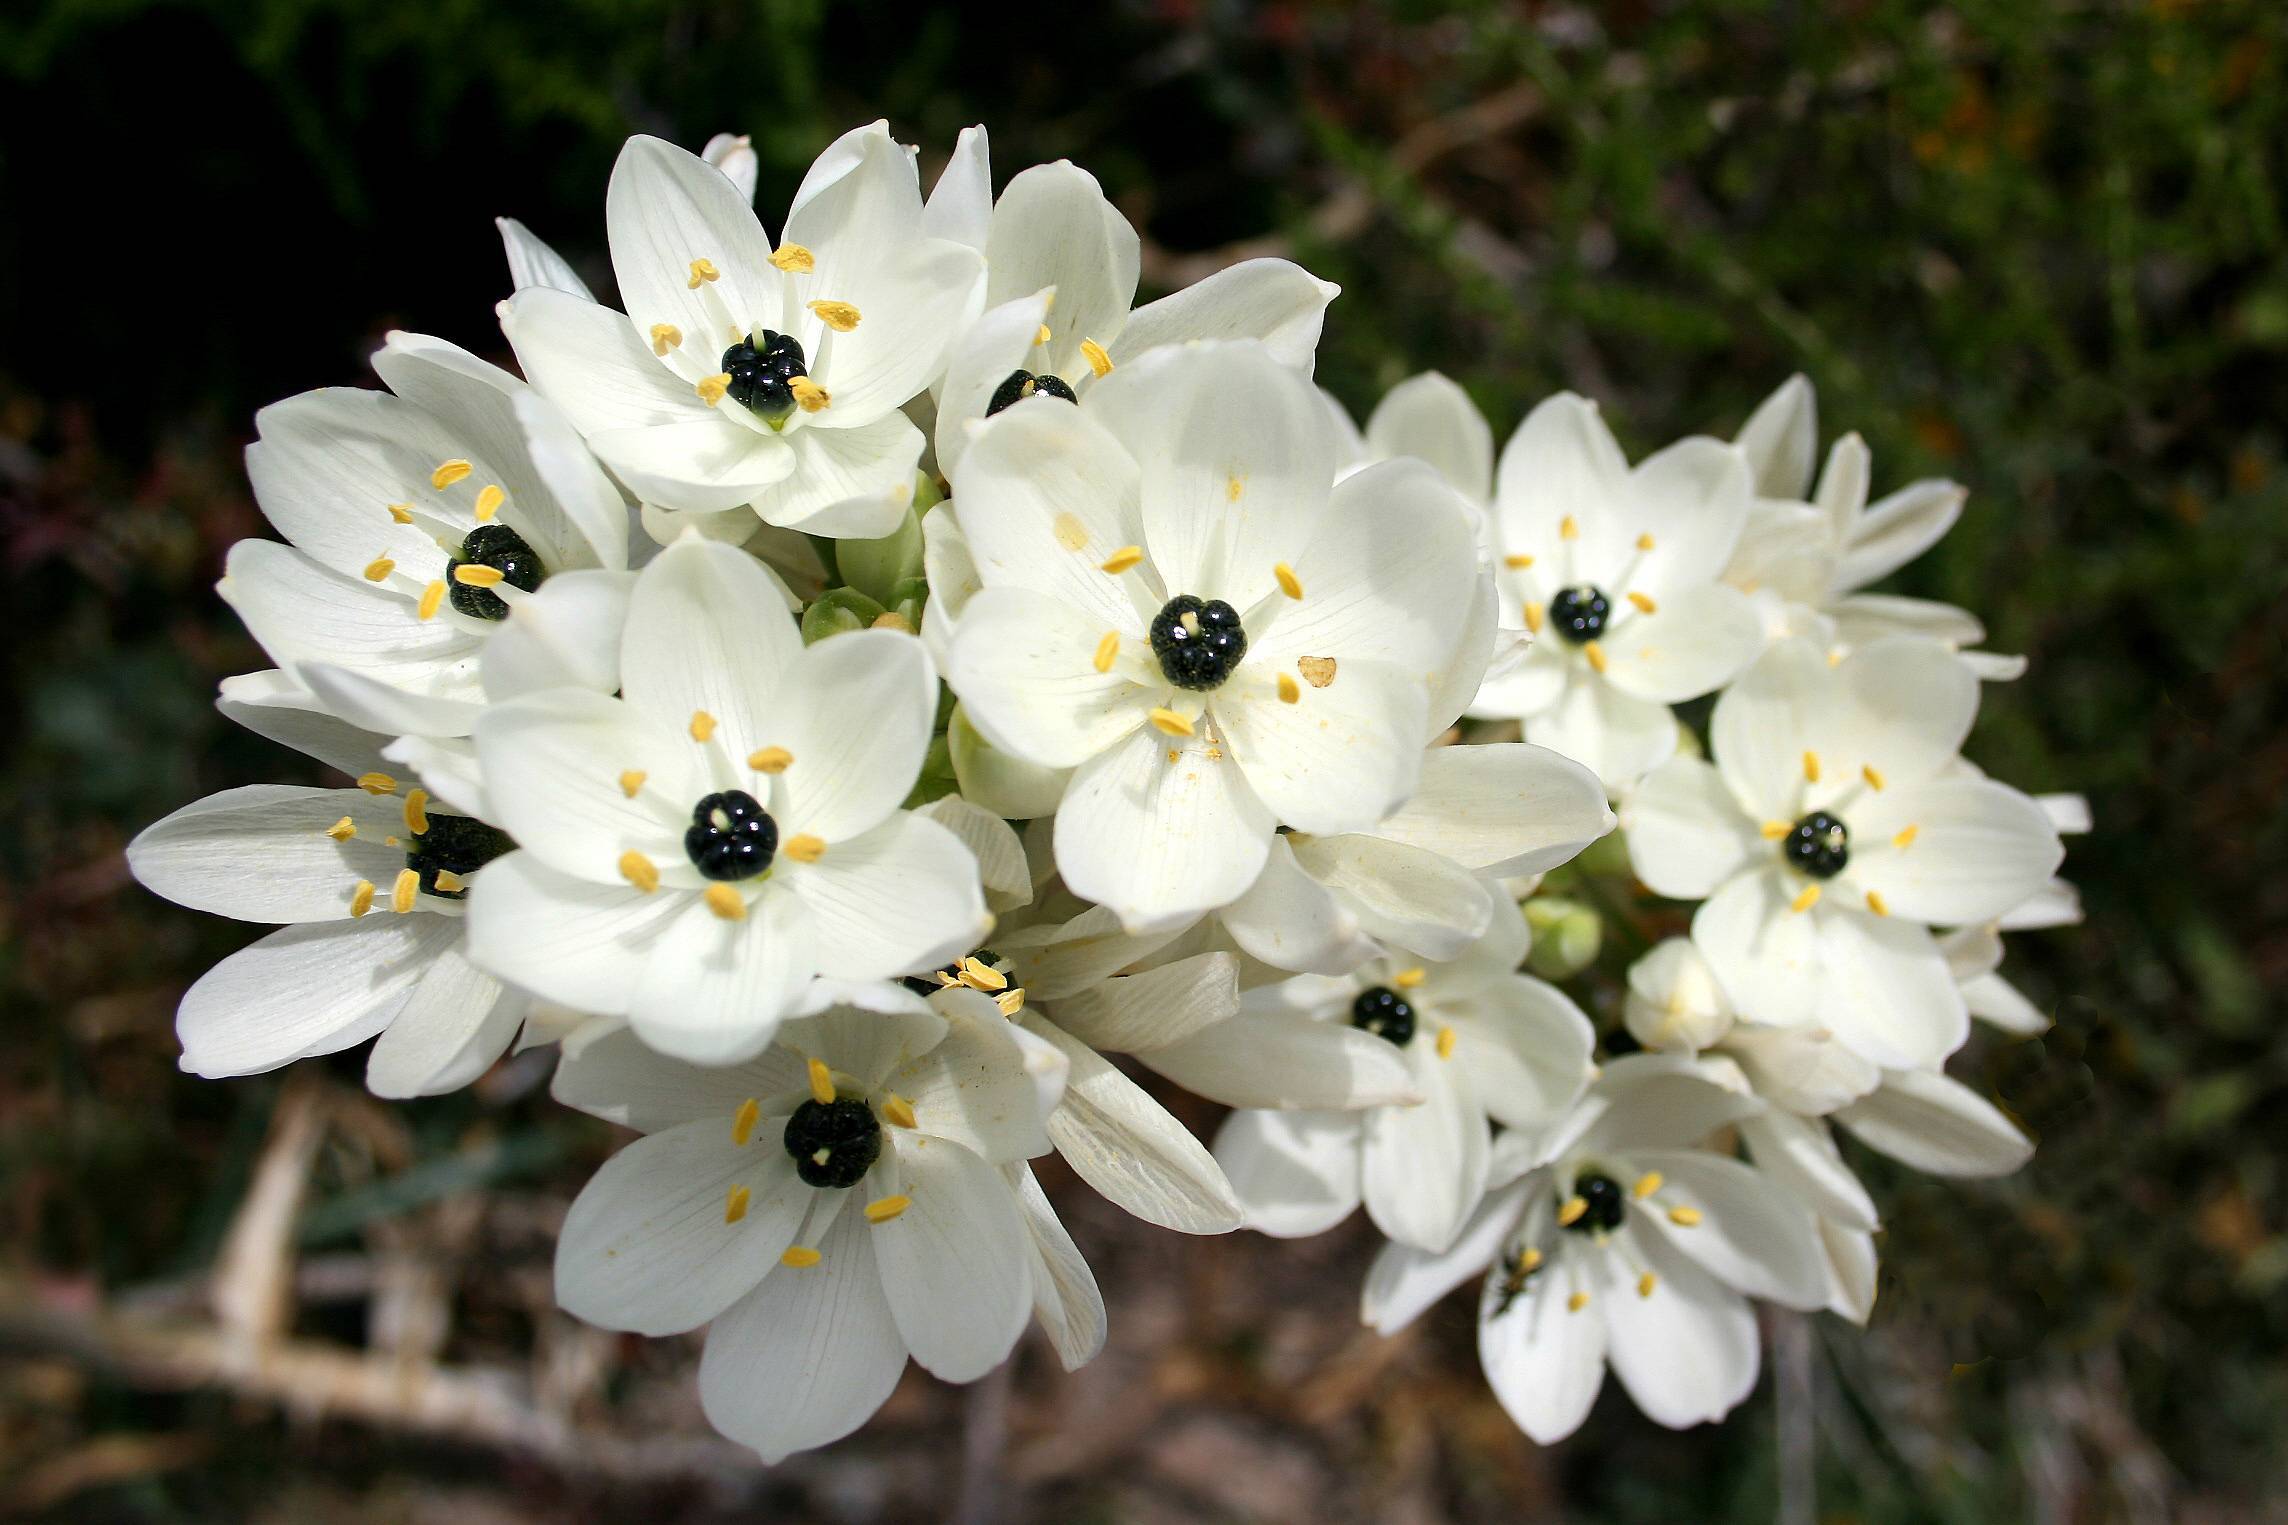 white flowers with black center, white filaments, yellow anthers and lime buds